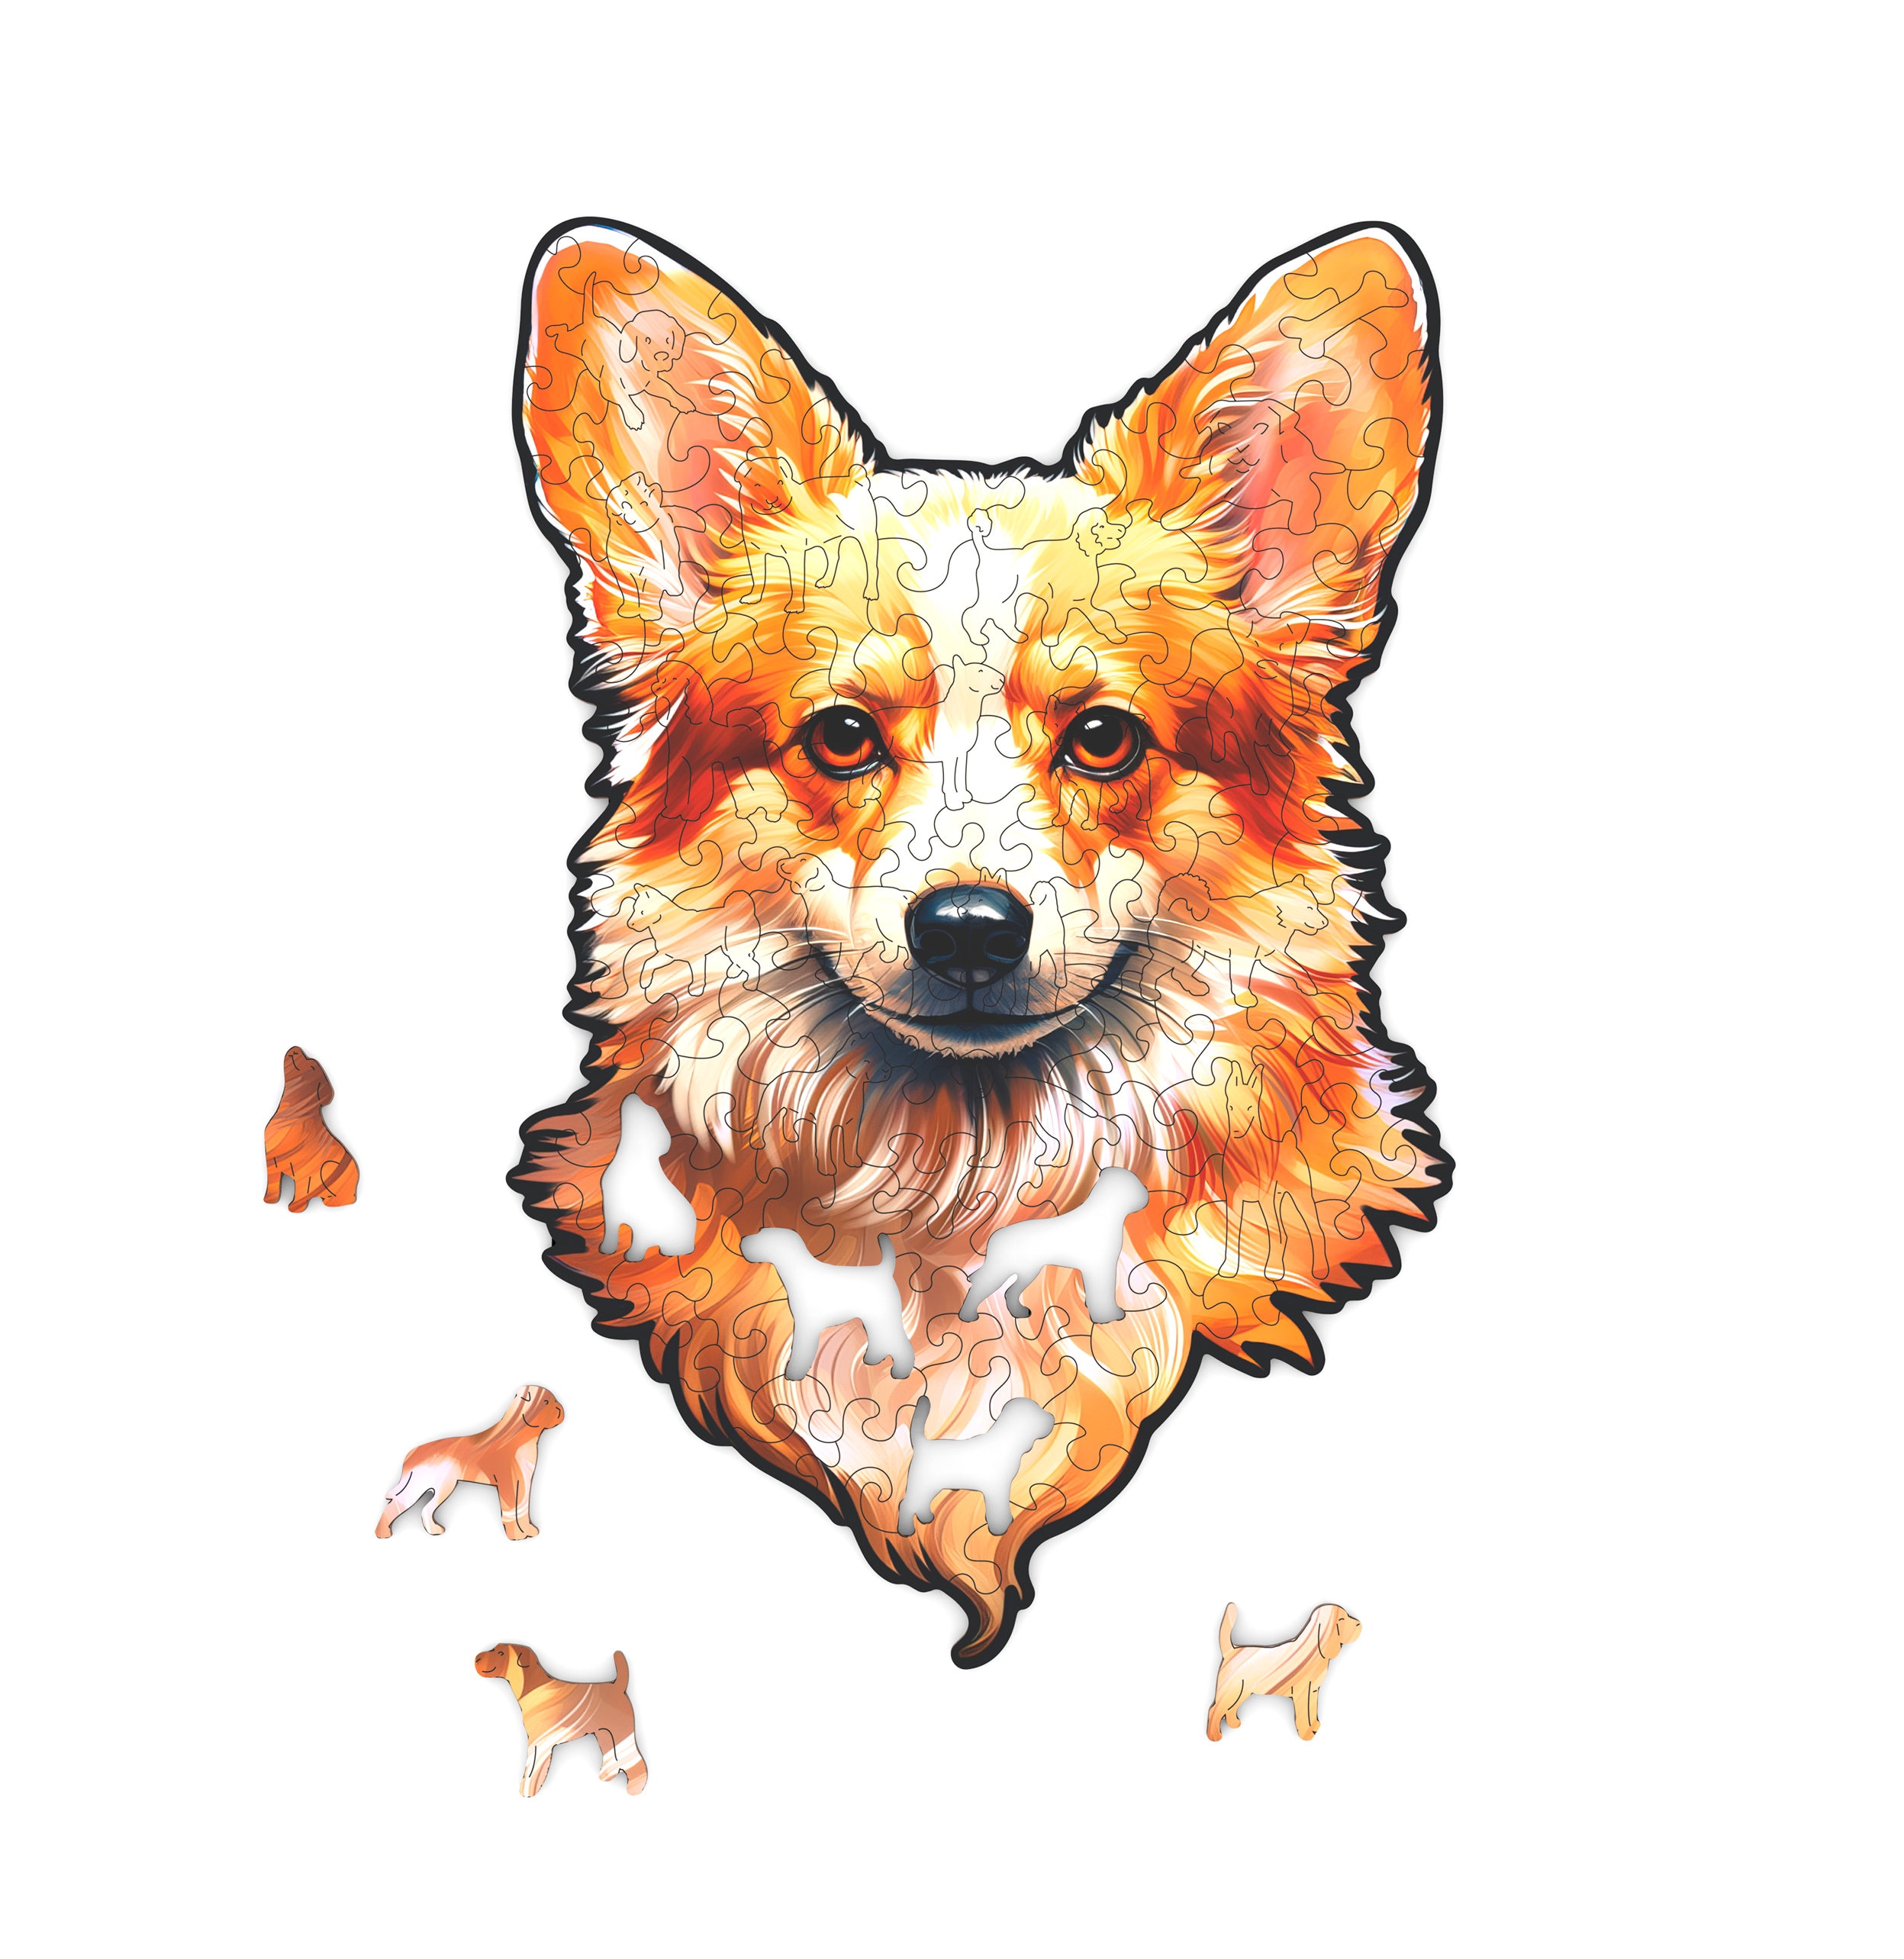 Starry Sky Corgi Puzzles 35 Pieces - Oil Art Animal Wooden Jigsaw Puzzles  for Adults, Each Piece is Unique, for Your Family - for Home Decor Or